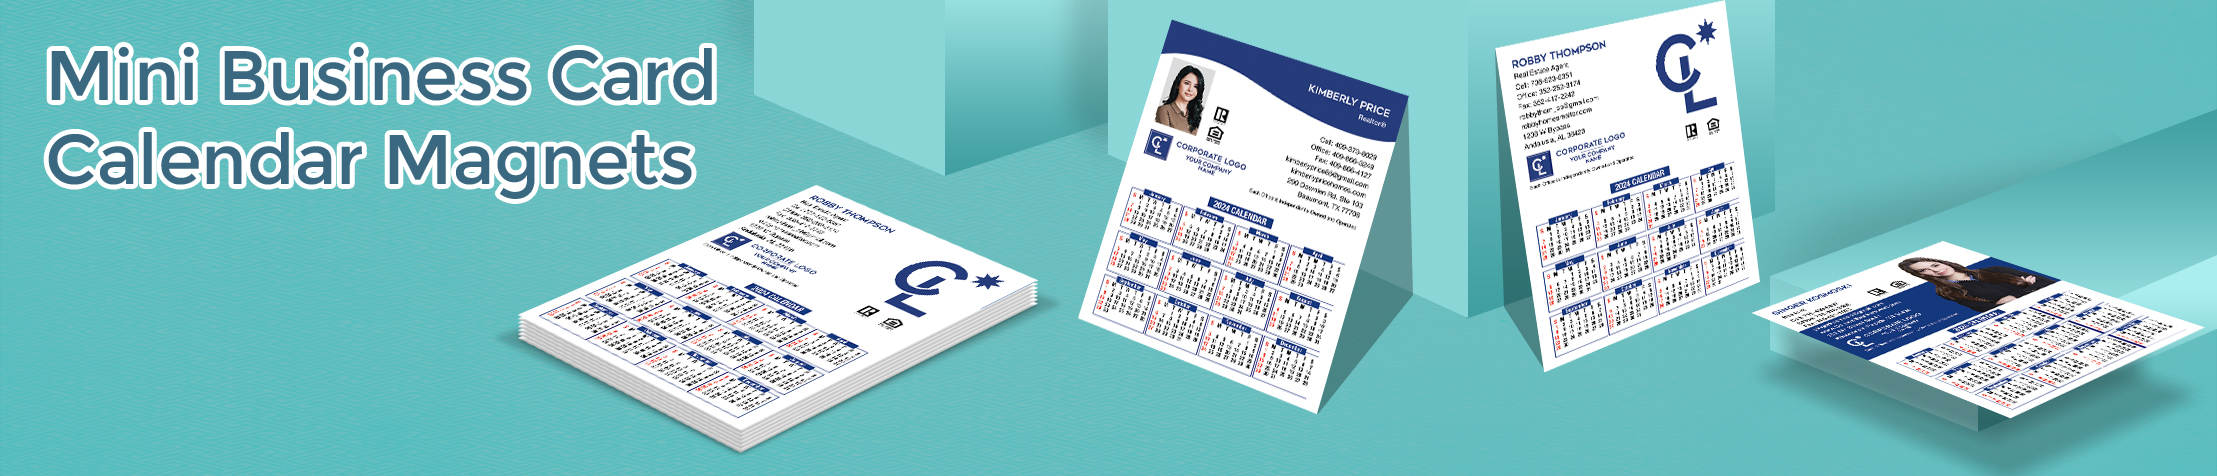 Coldwell Banker Real Estate Mini Business Card Calendar Magnets - Coldwell Banker  personalized marketing materials | BestPrintBuy.com